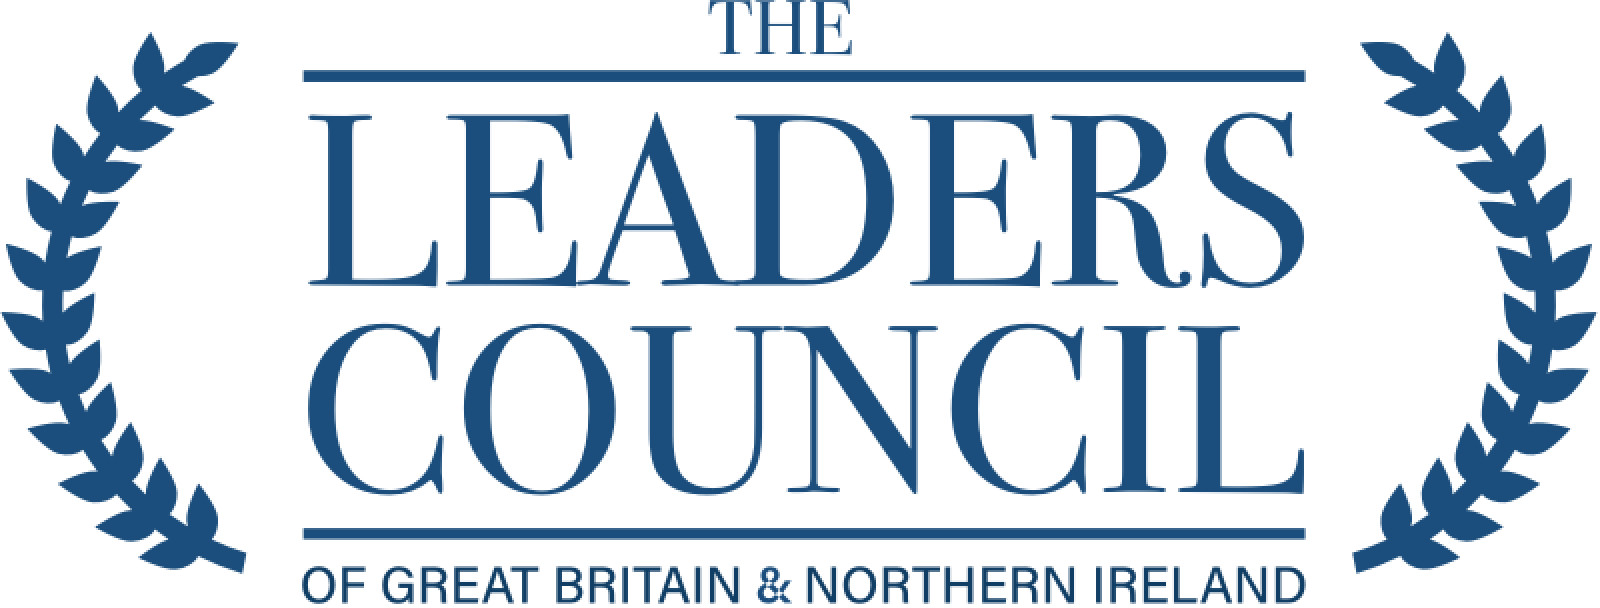 Helena Flowers appears in Leaders Council podcast alongside Sir Andrew Strauss.